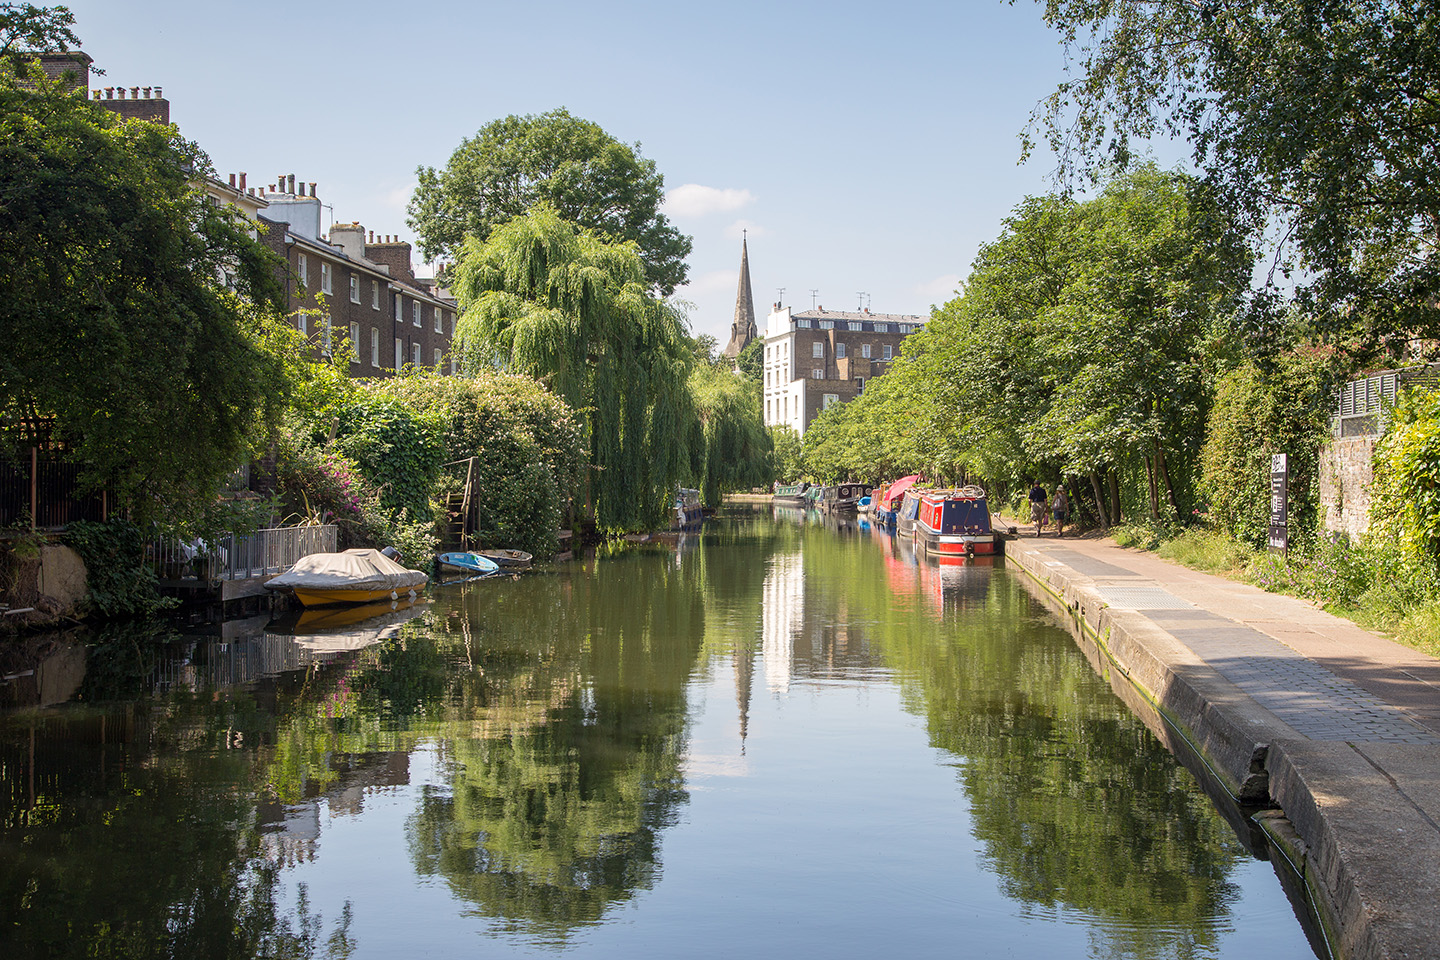 A view along the Regent's Canal in London